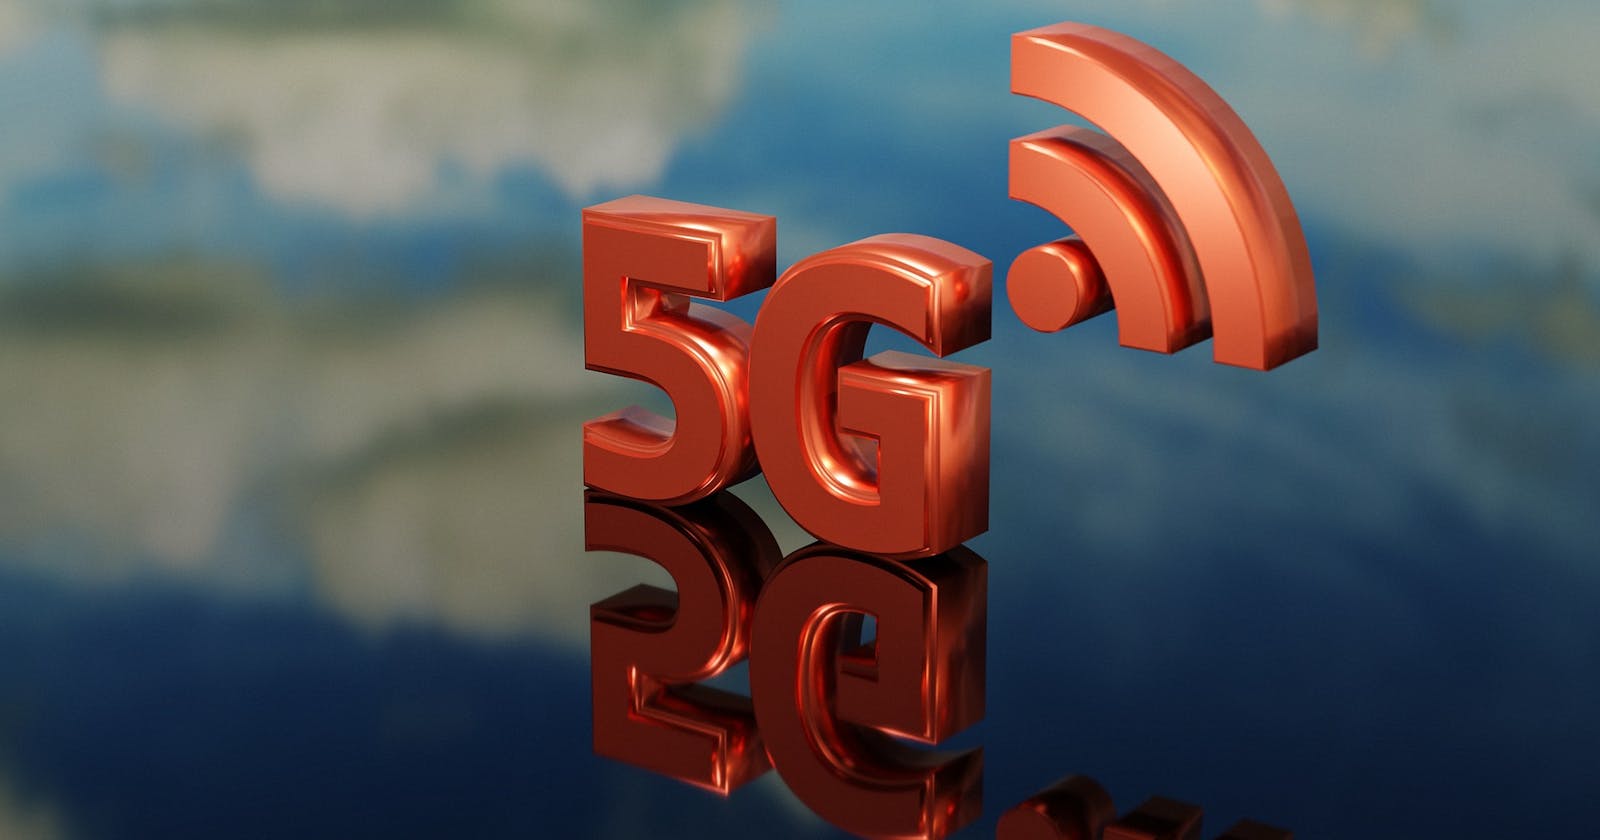 5G Technology: Transforming Industries, Businesses, and Job Markets